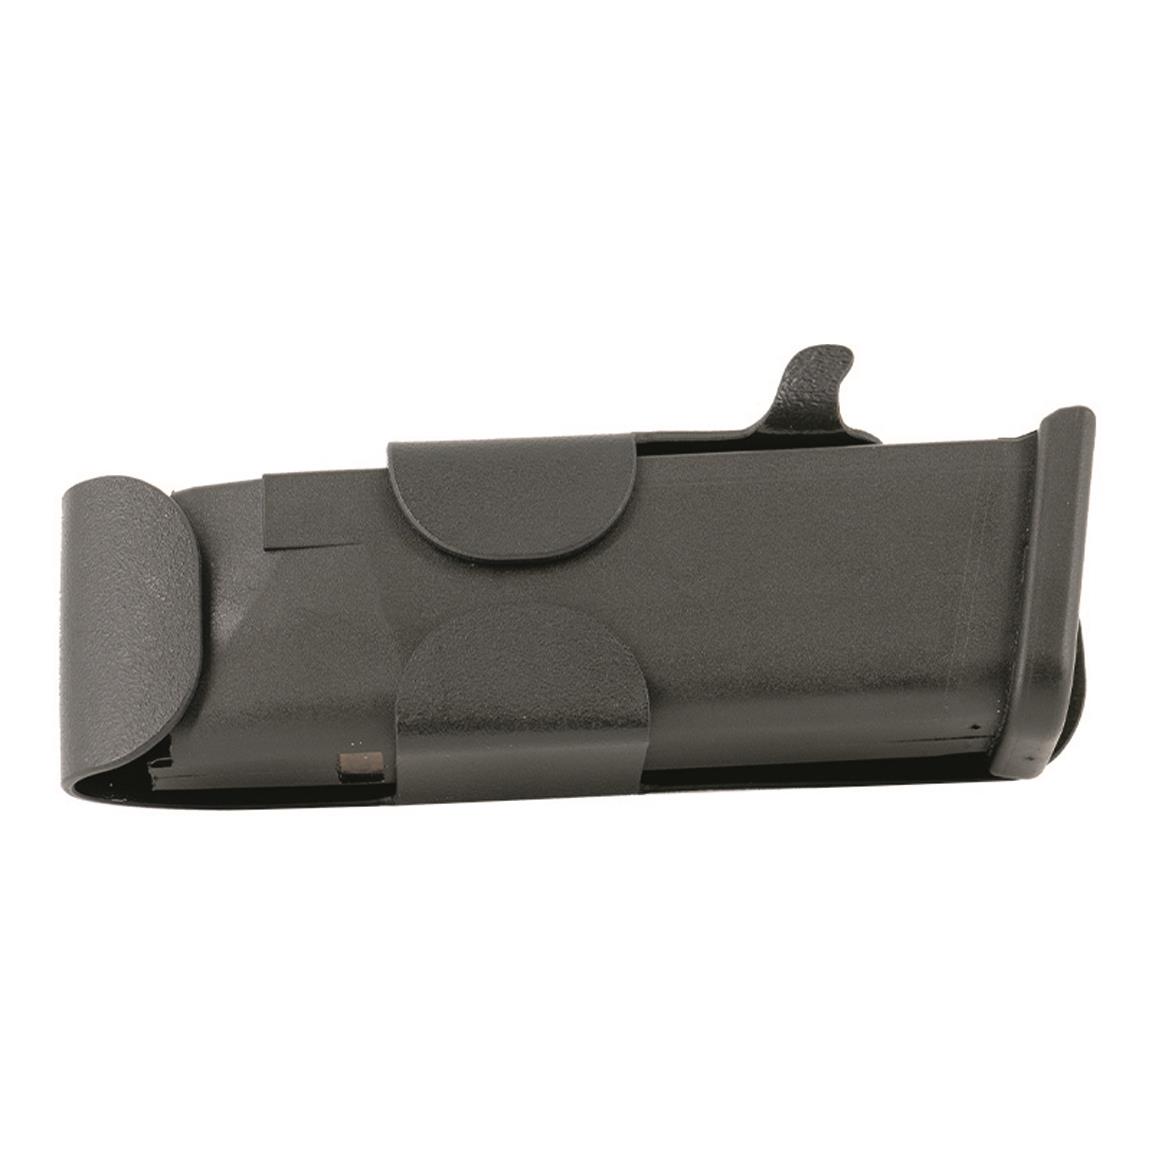 Snagmag Concealed Magazine Holster, Springfield XDS/SCCY CPX/CZ 2075 RAMI/Taurus PT1111/Taurus PT140